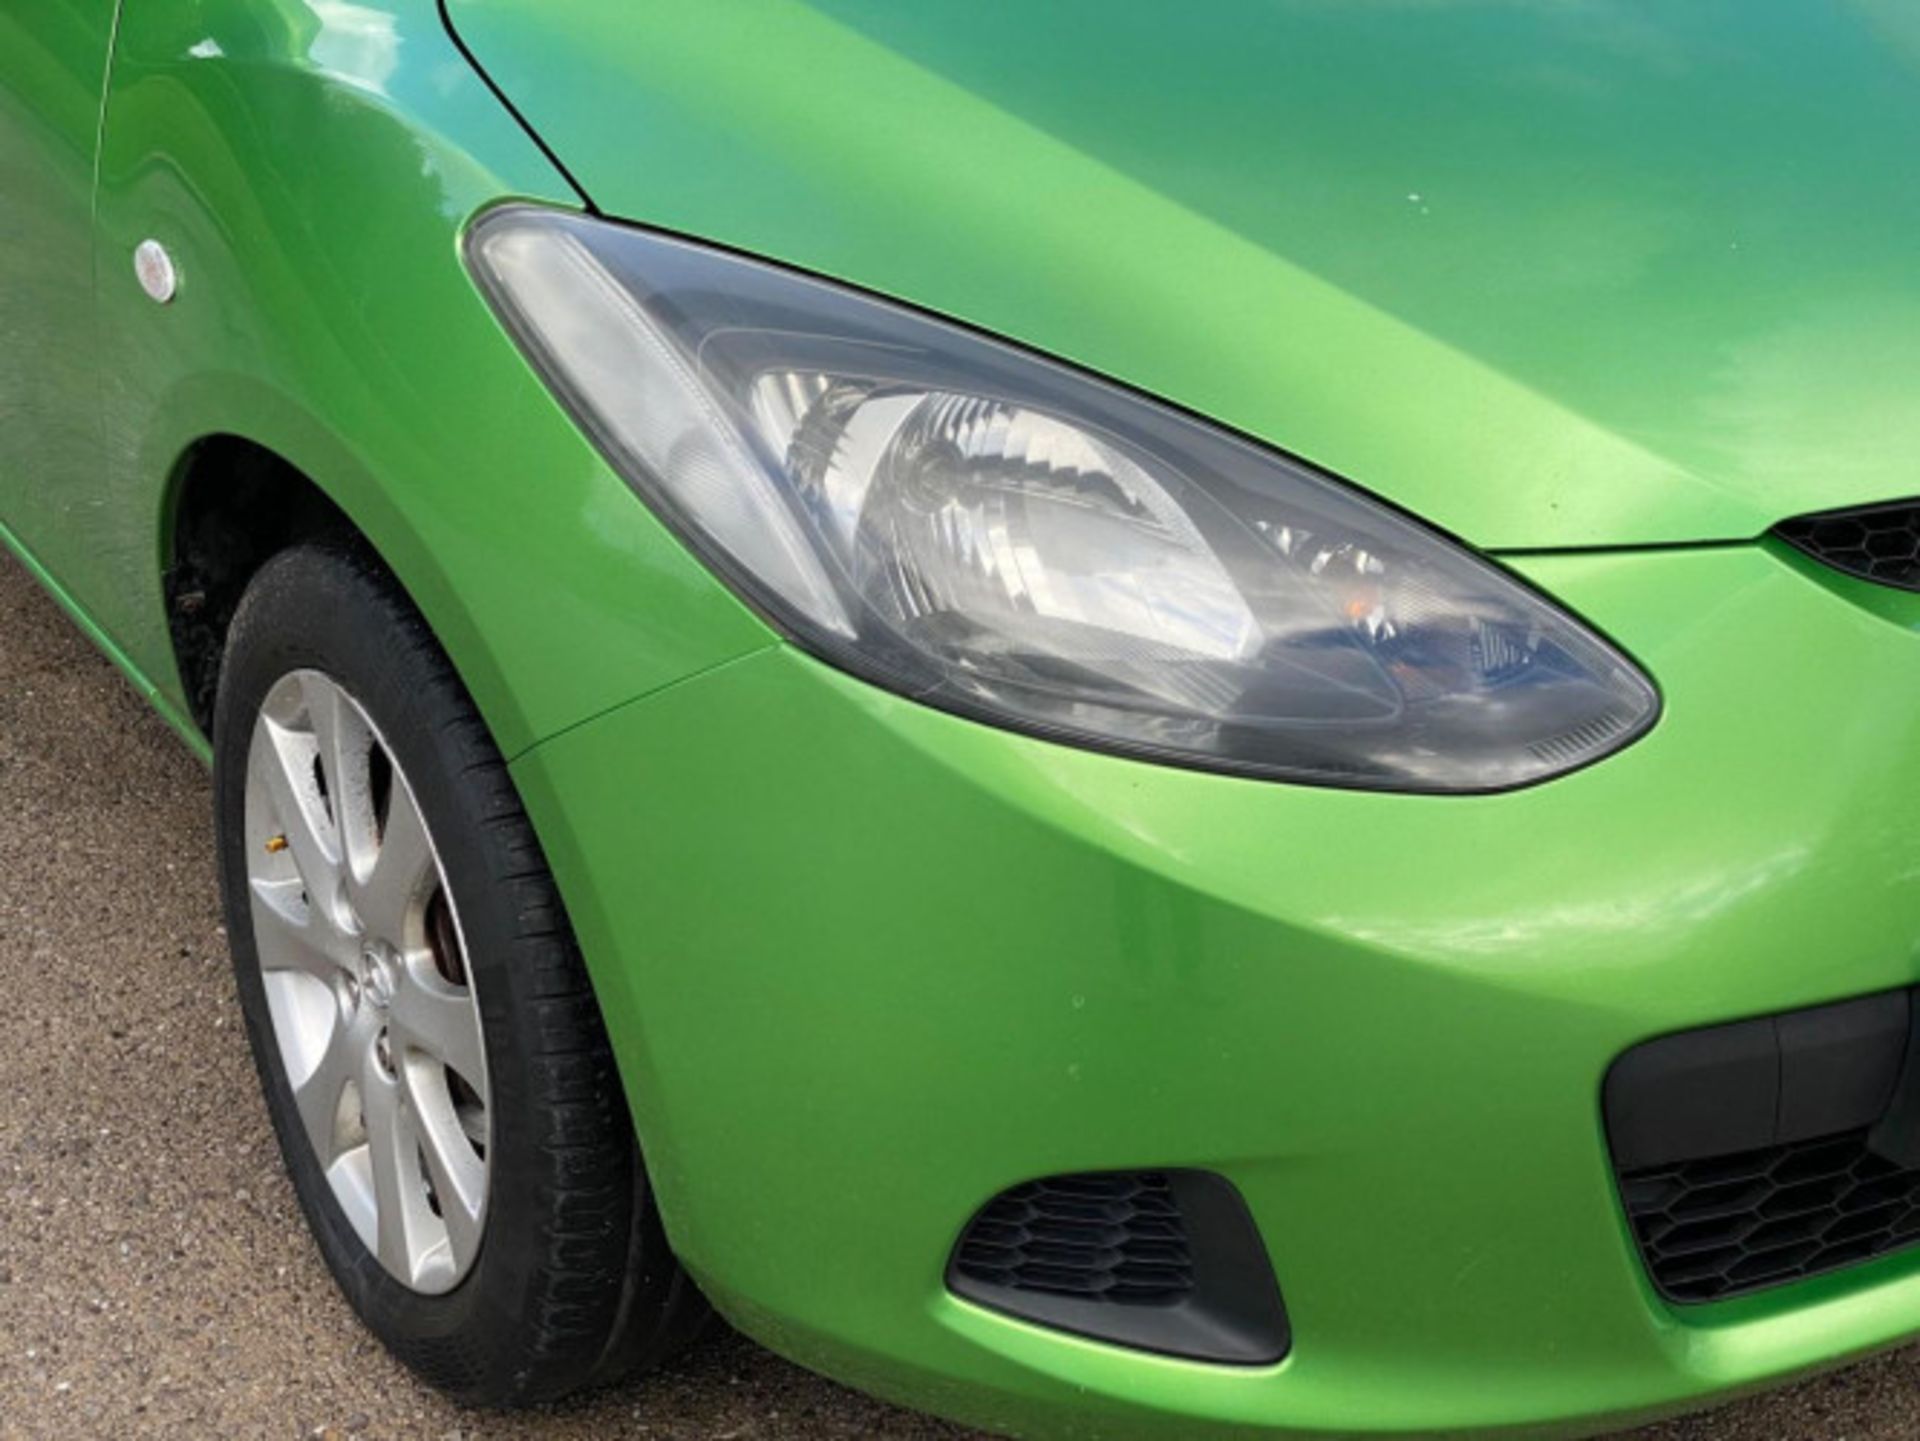 >>--NO VAT ON HAMMER--<< MAZDA MAZDA2 1.3 TS2 EURO 4: A RELIABLE AND ECONOMICAL HATCHBACK - Image 51 of 55